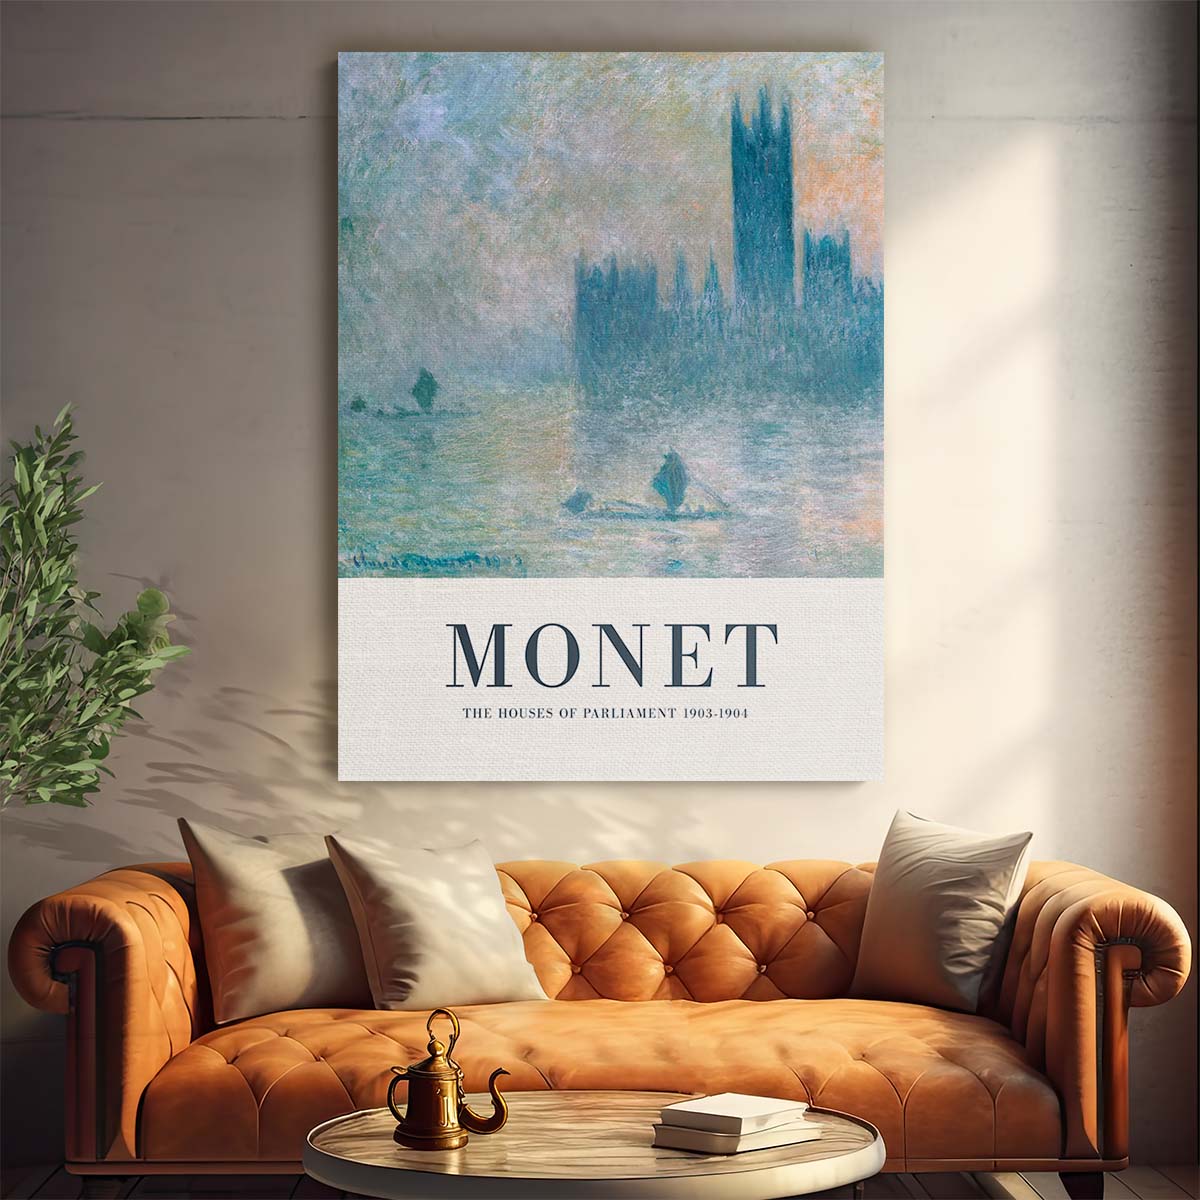 Claude Monet's Inspirational Oil Painting - The Houses of Parliament by Luxuriance Designs, made in USA